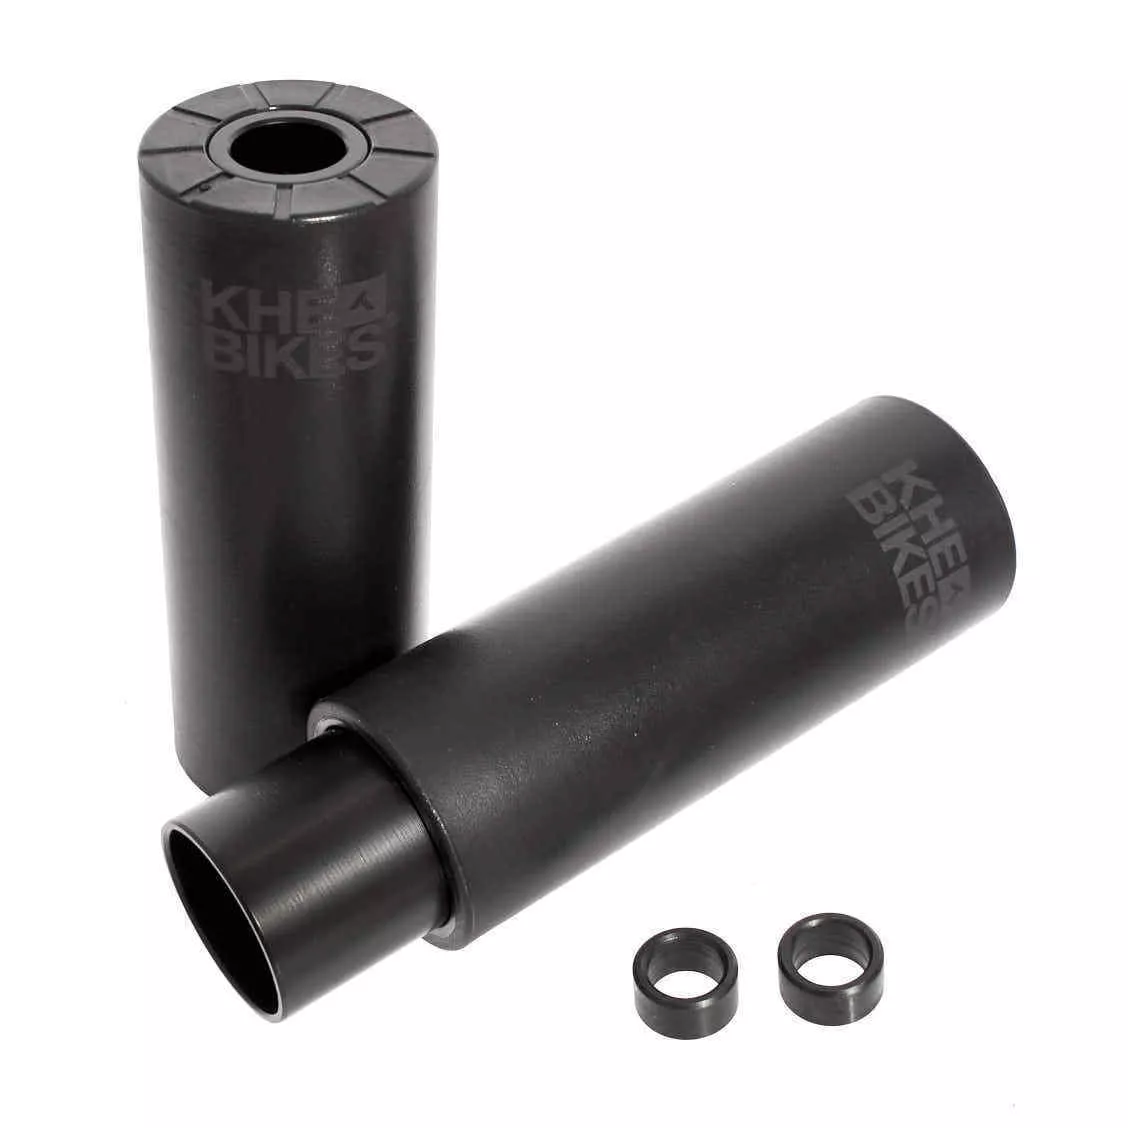 BMX Pegs KHE 2ND PRO 1 pair suitable for 10 mm and 14 mm